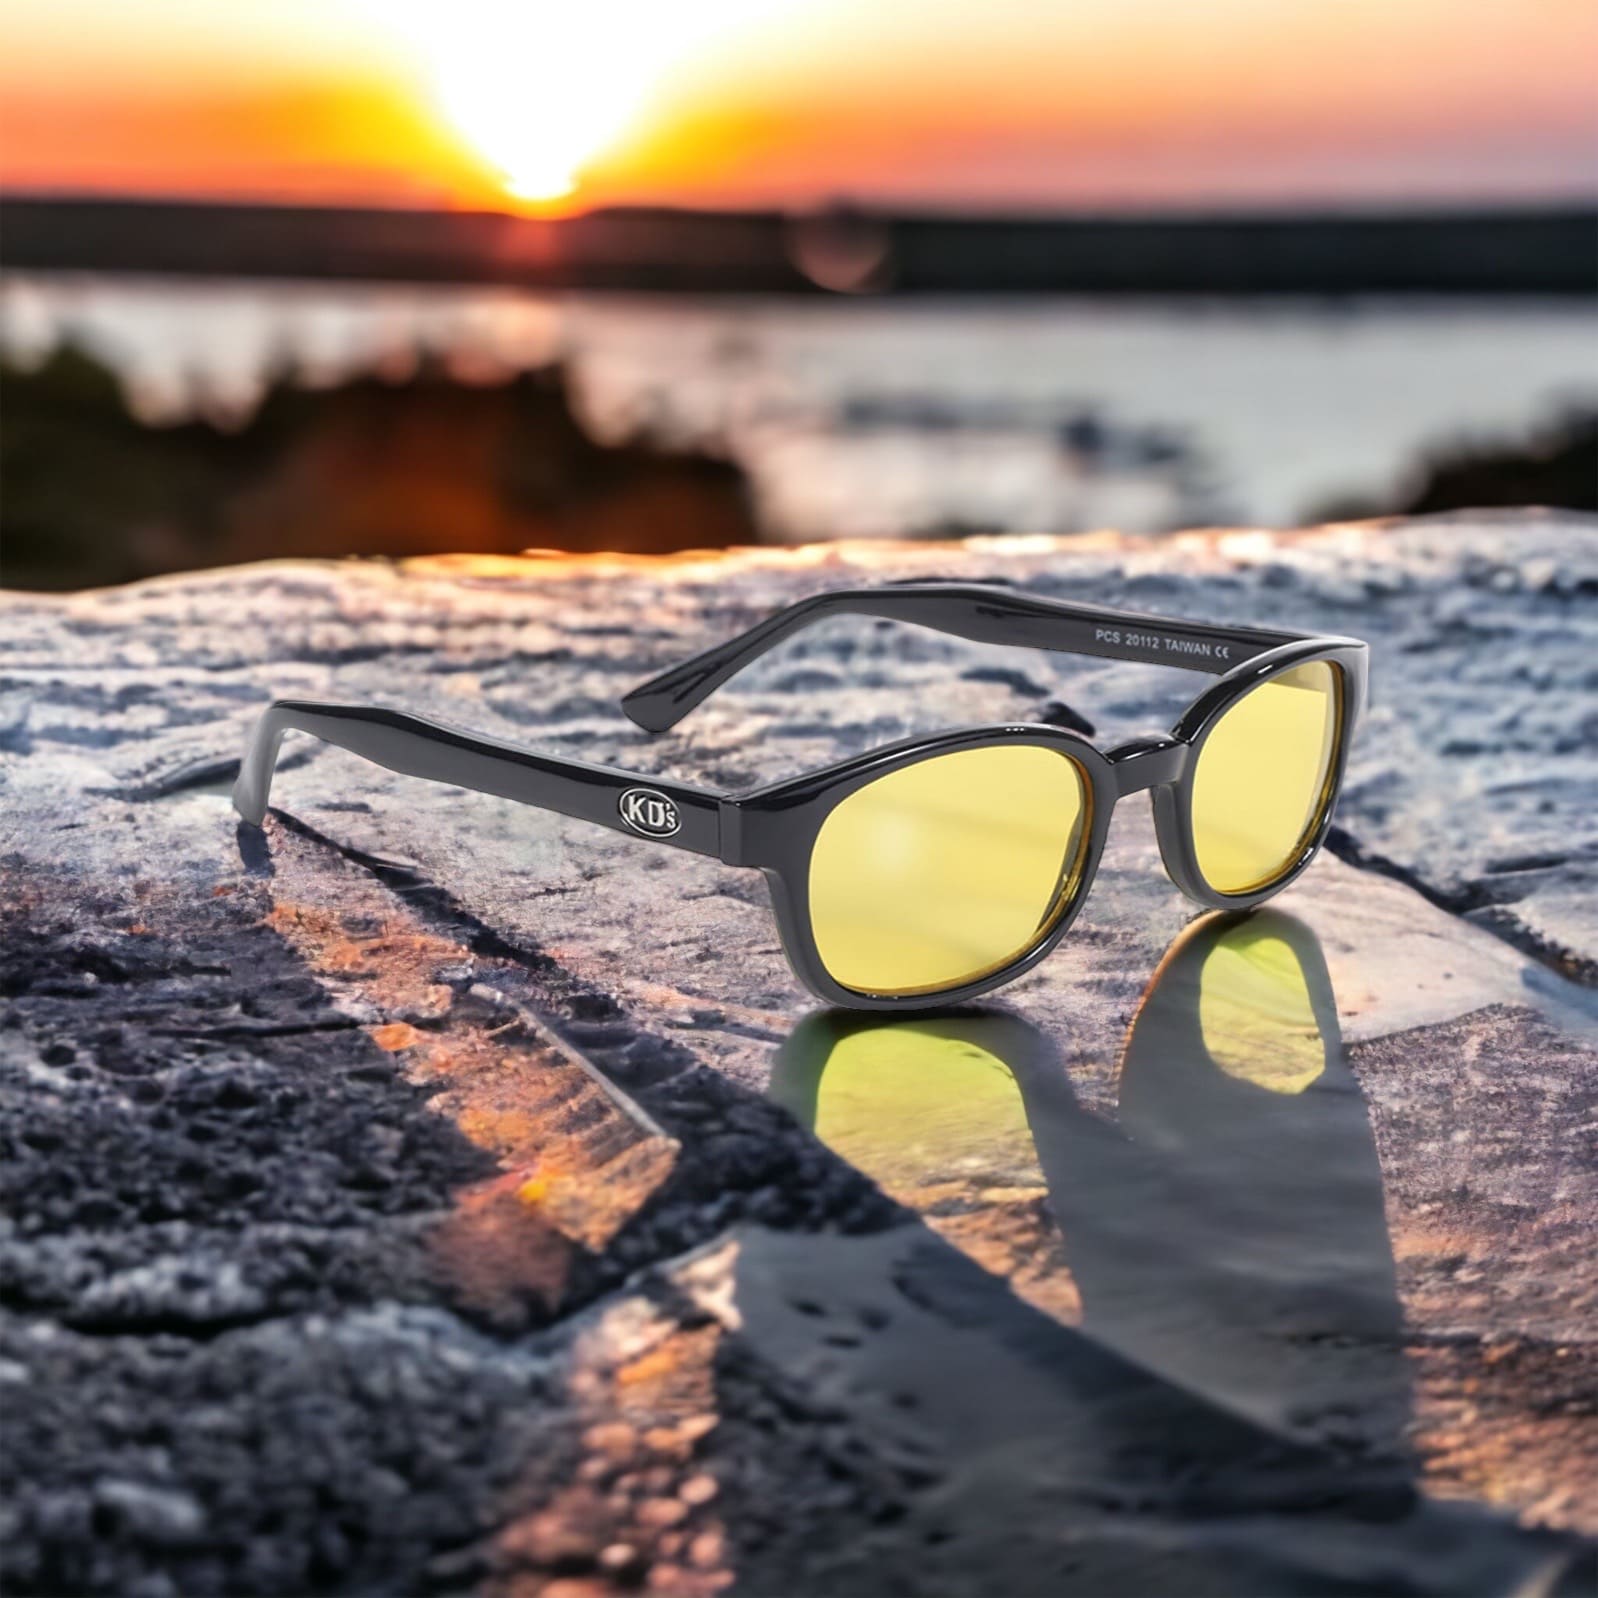 KD's 20112 sunglasses that fit under a motorcycle or ski helmet. With a stylish black frame and yellow tinted lenses set on a cliff in front of a sunset.